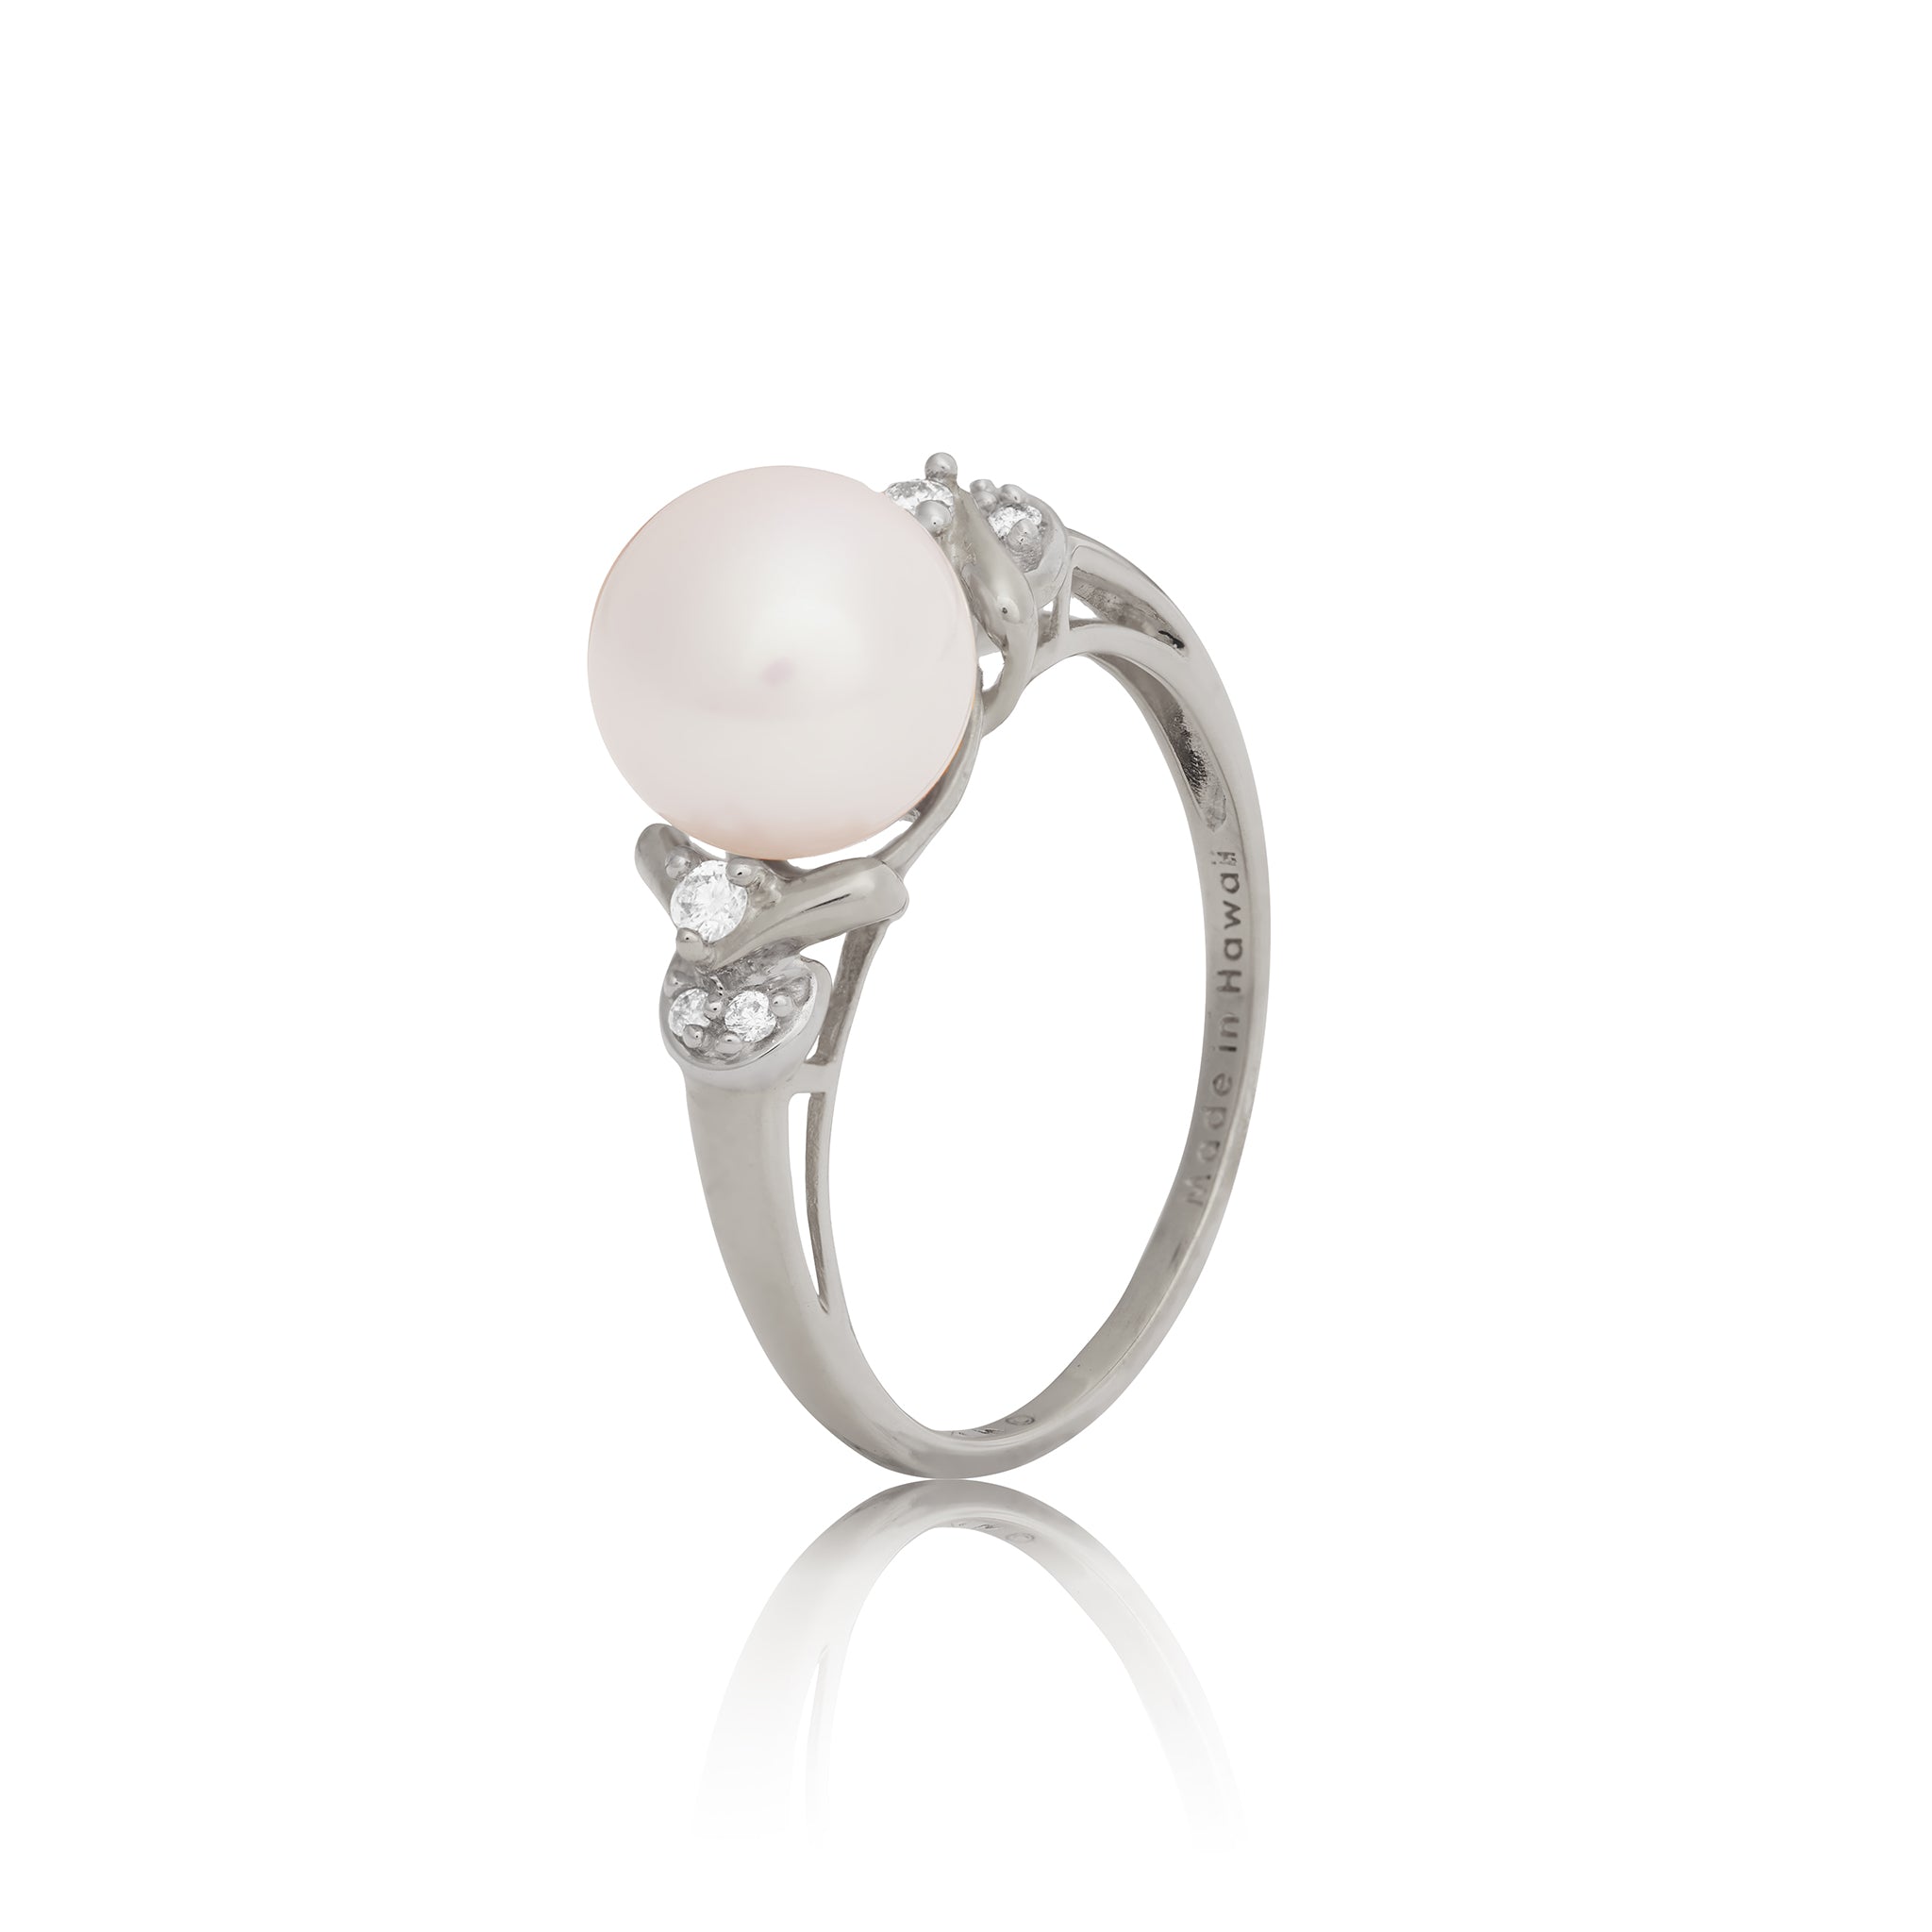 Freshwater White Pearl Ring in White Gold with Diamonds - 8-9mm